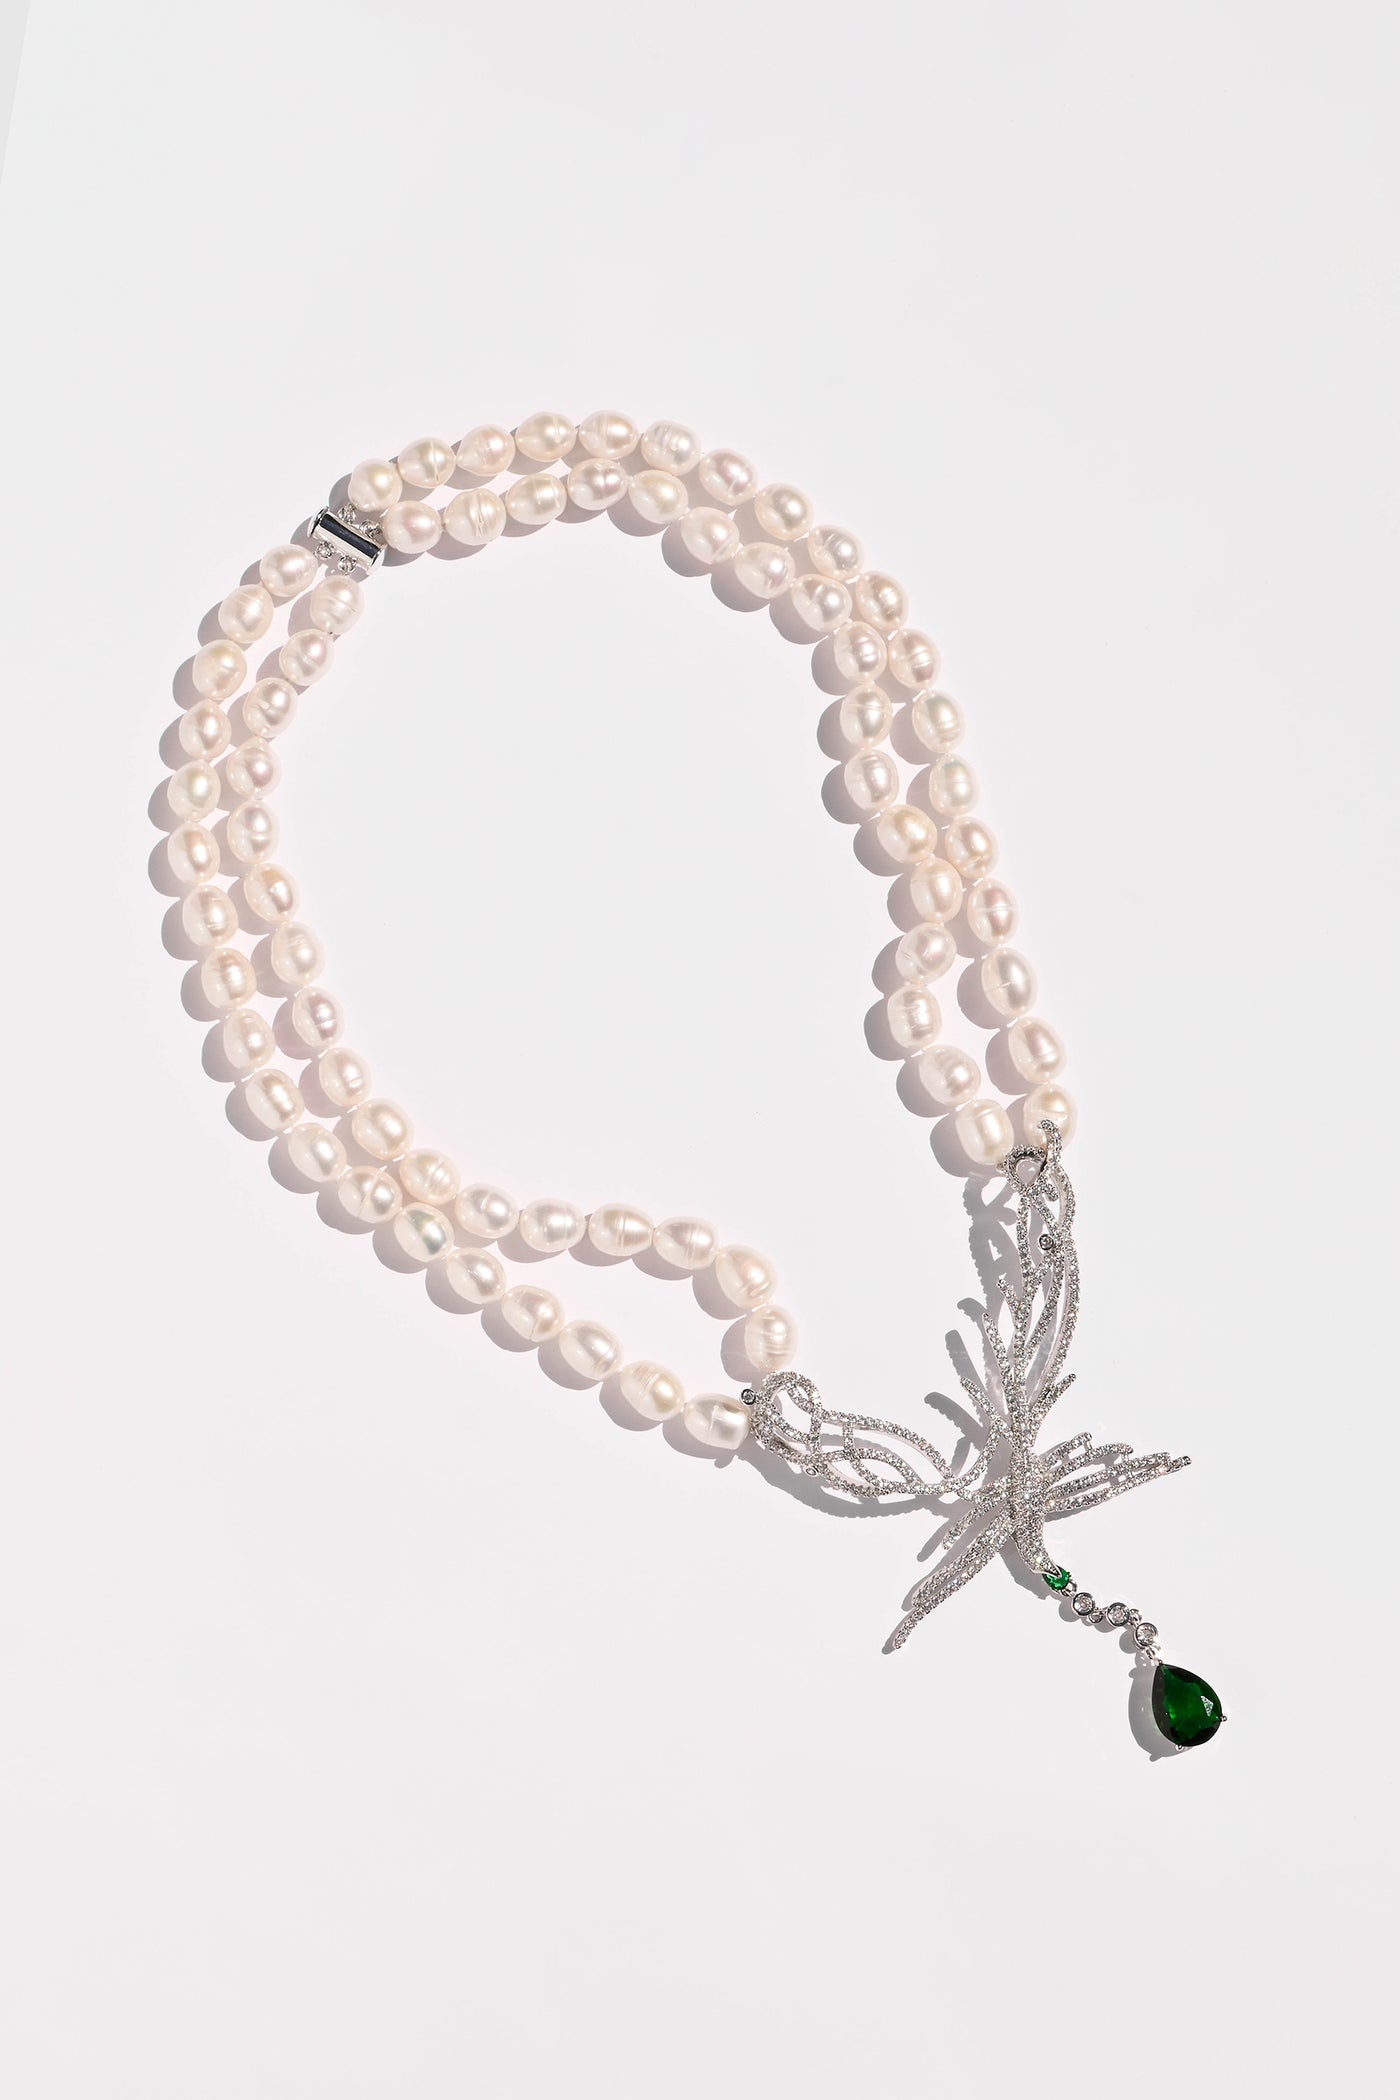 Lila Pearl Necklace